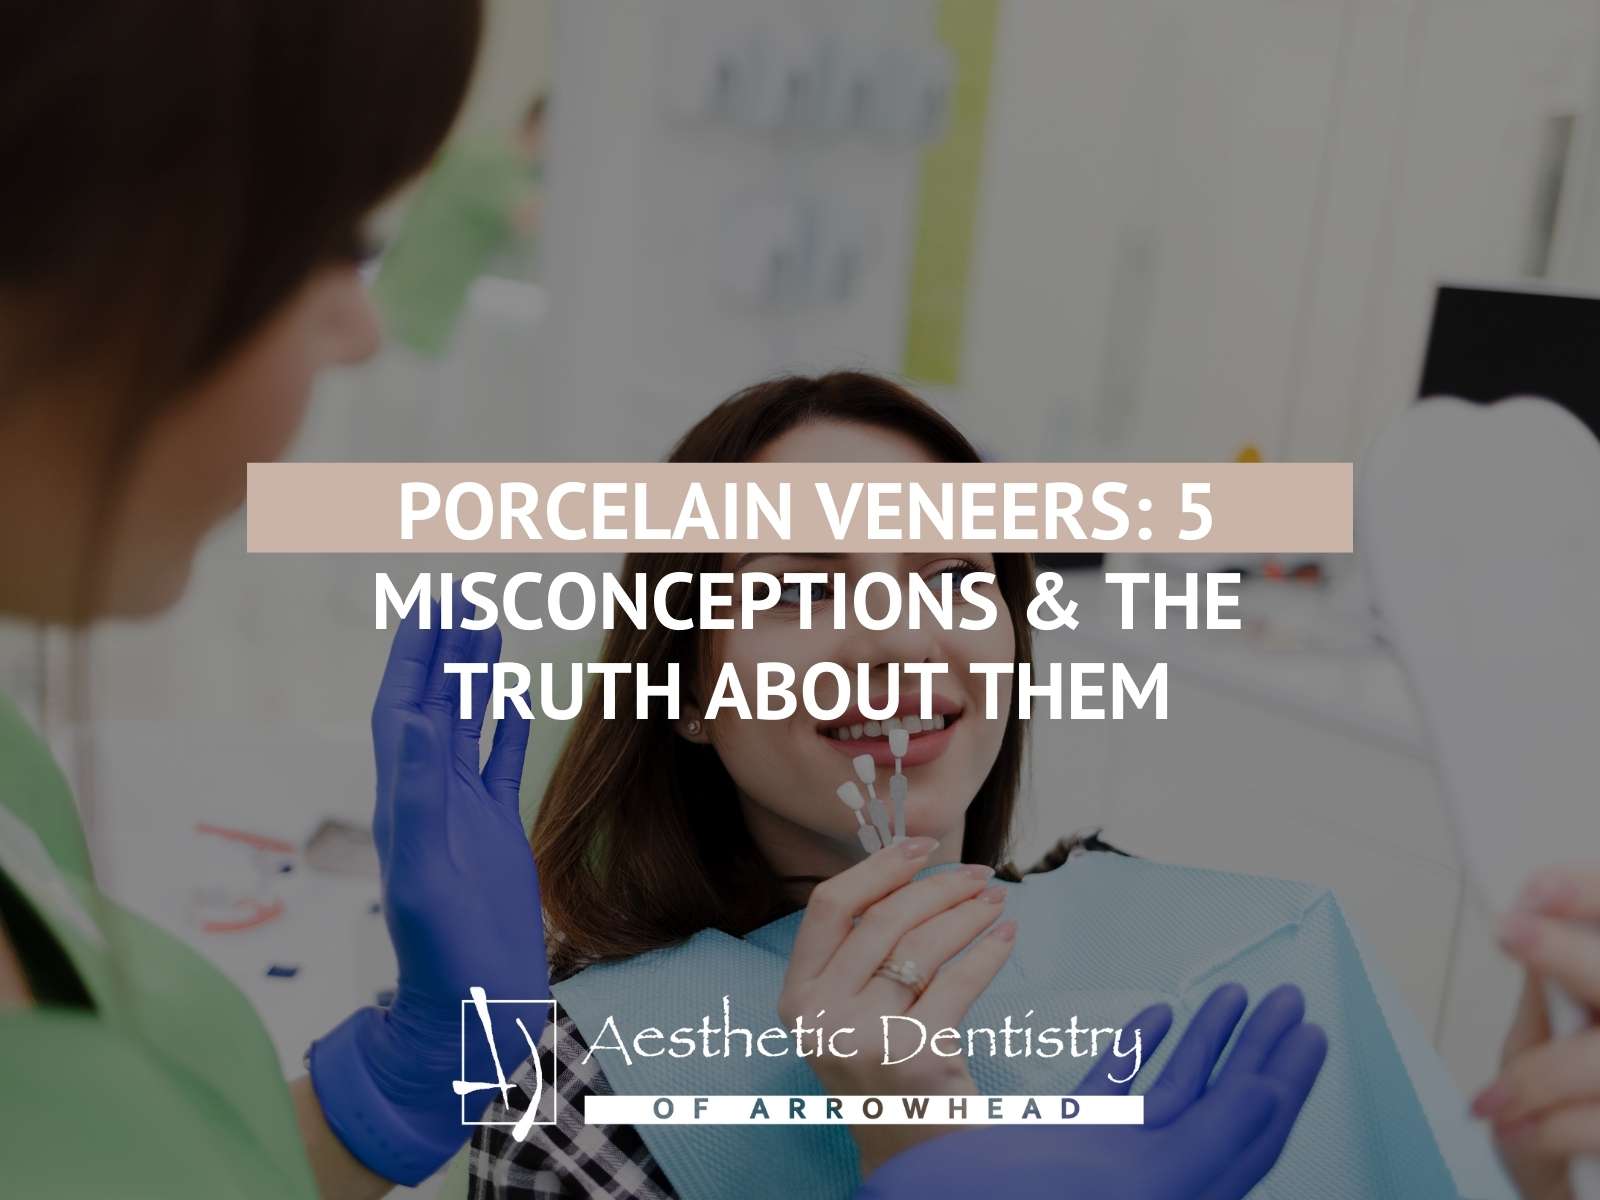 Porcelain Veneers 5 Misconceptions & The Truth About Them